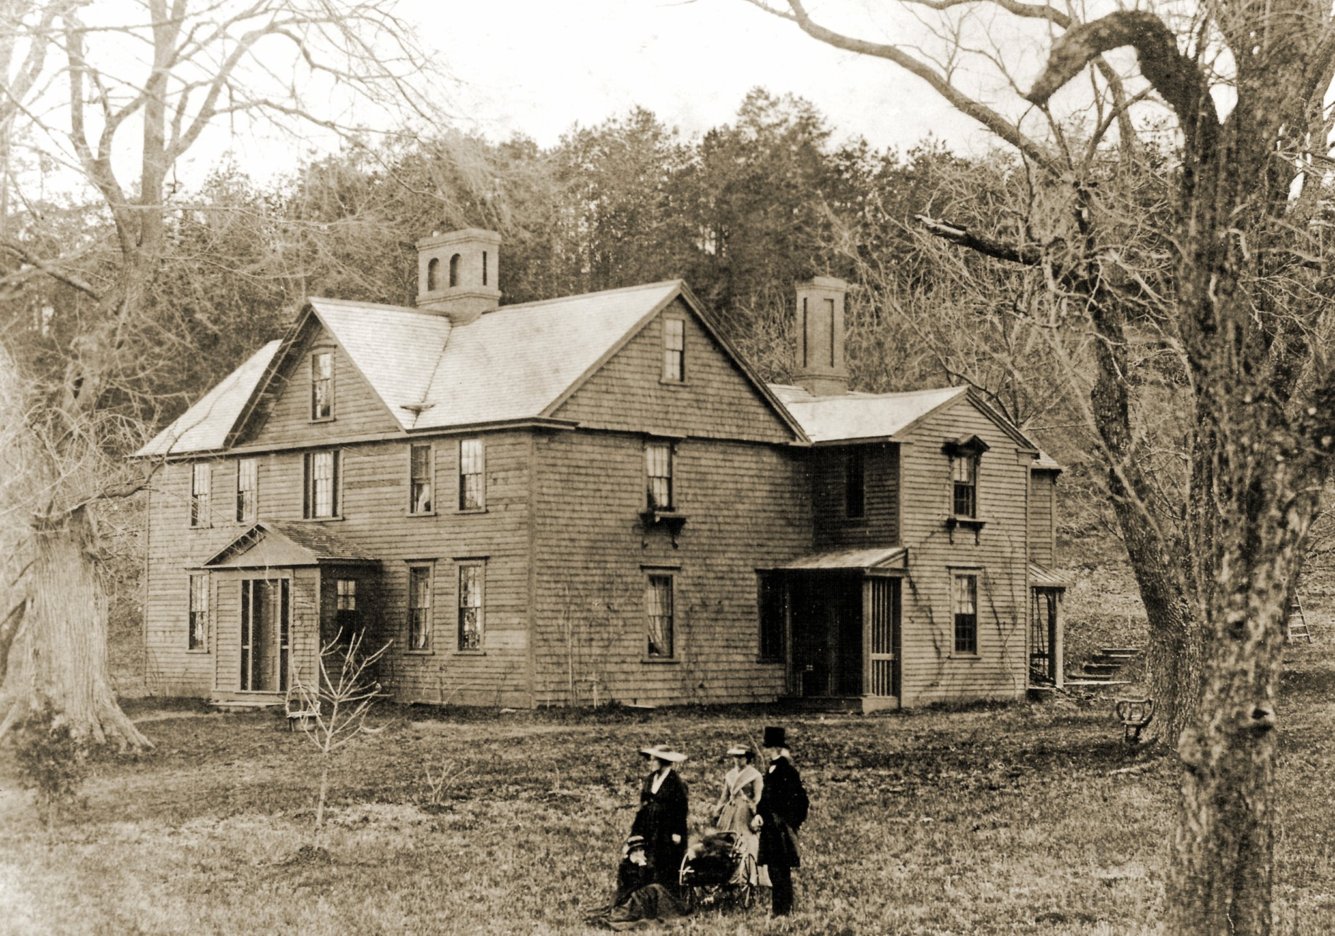 Orchard House